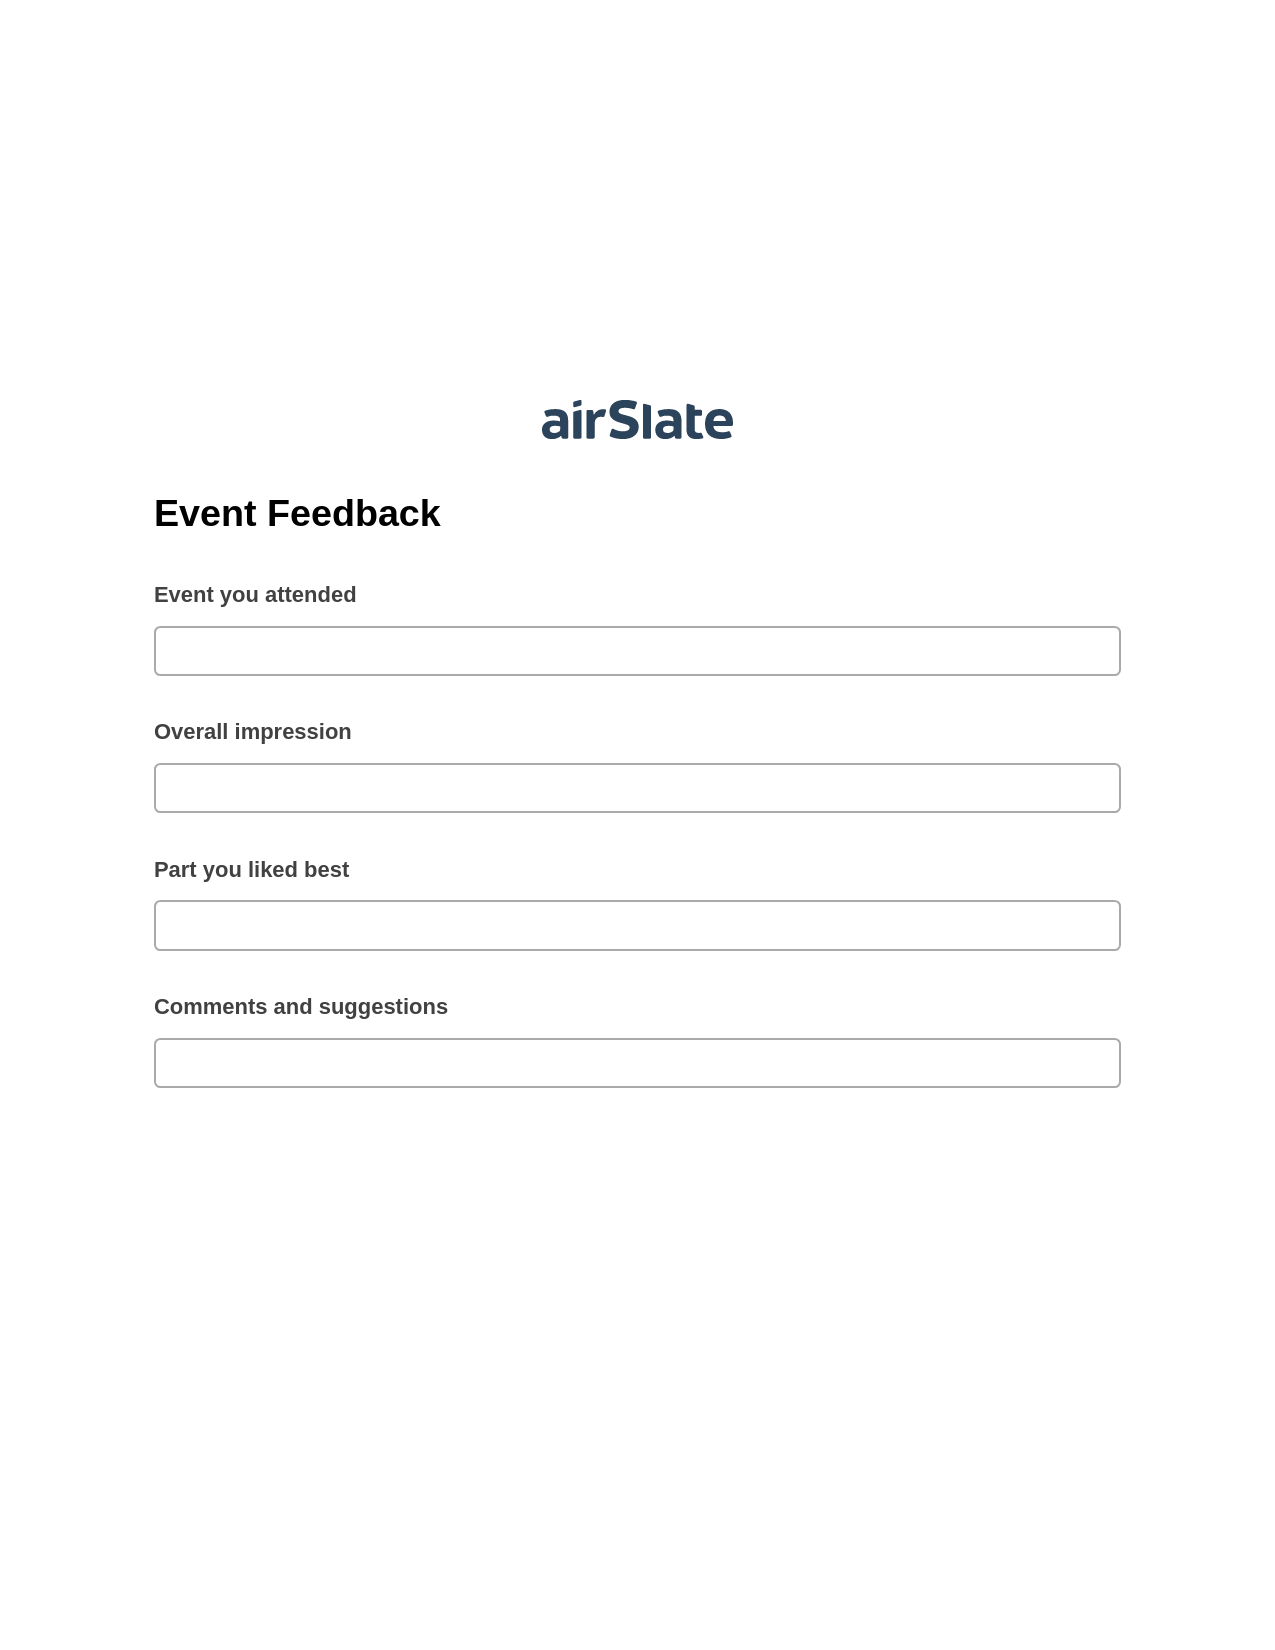 Event Feedback Pre-fill Slate from MS Dynamics 365 Records Bot, Pre-fill with Custom Data Bot, Archive to SharePoint Folder Bot